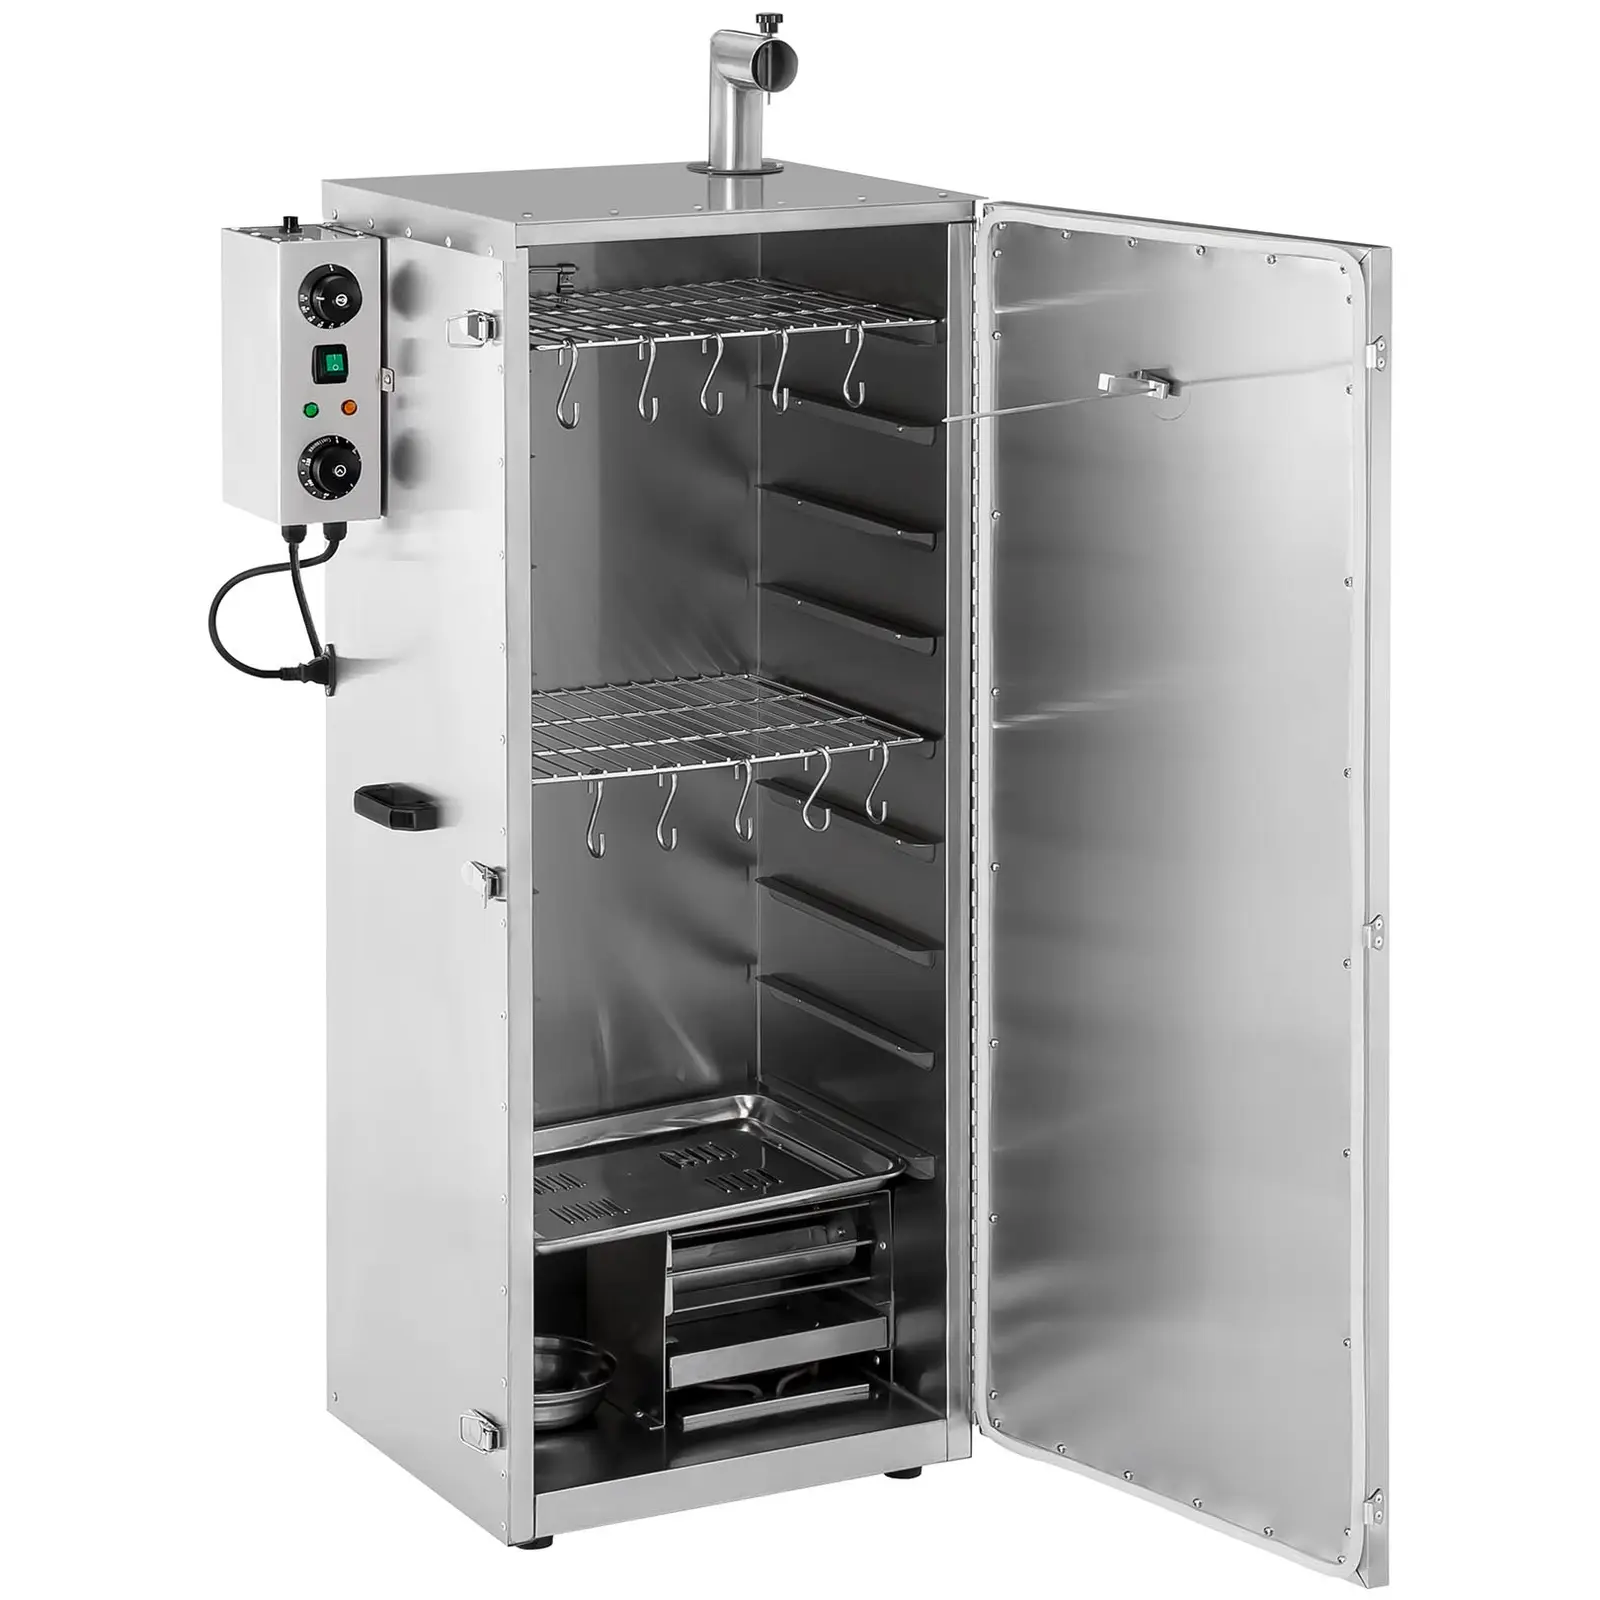 Fumoir professionnel - 147 l - Royal Catering - 8 grilles - 6